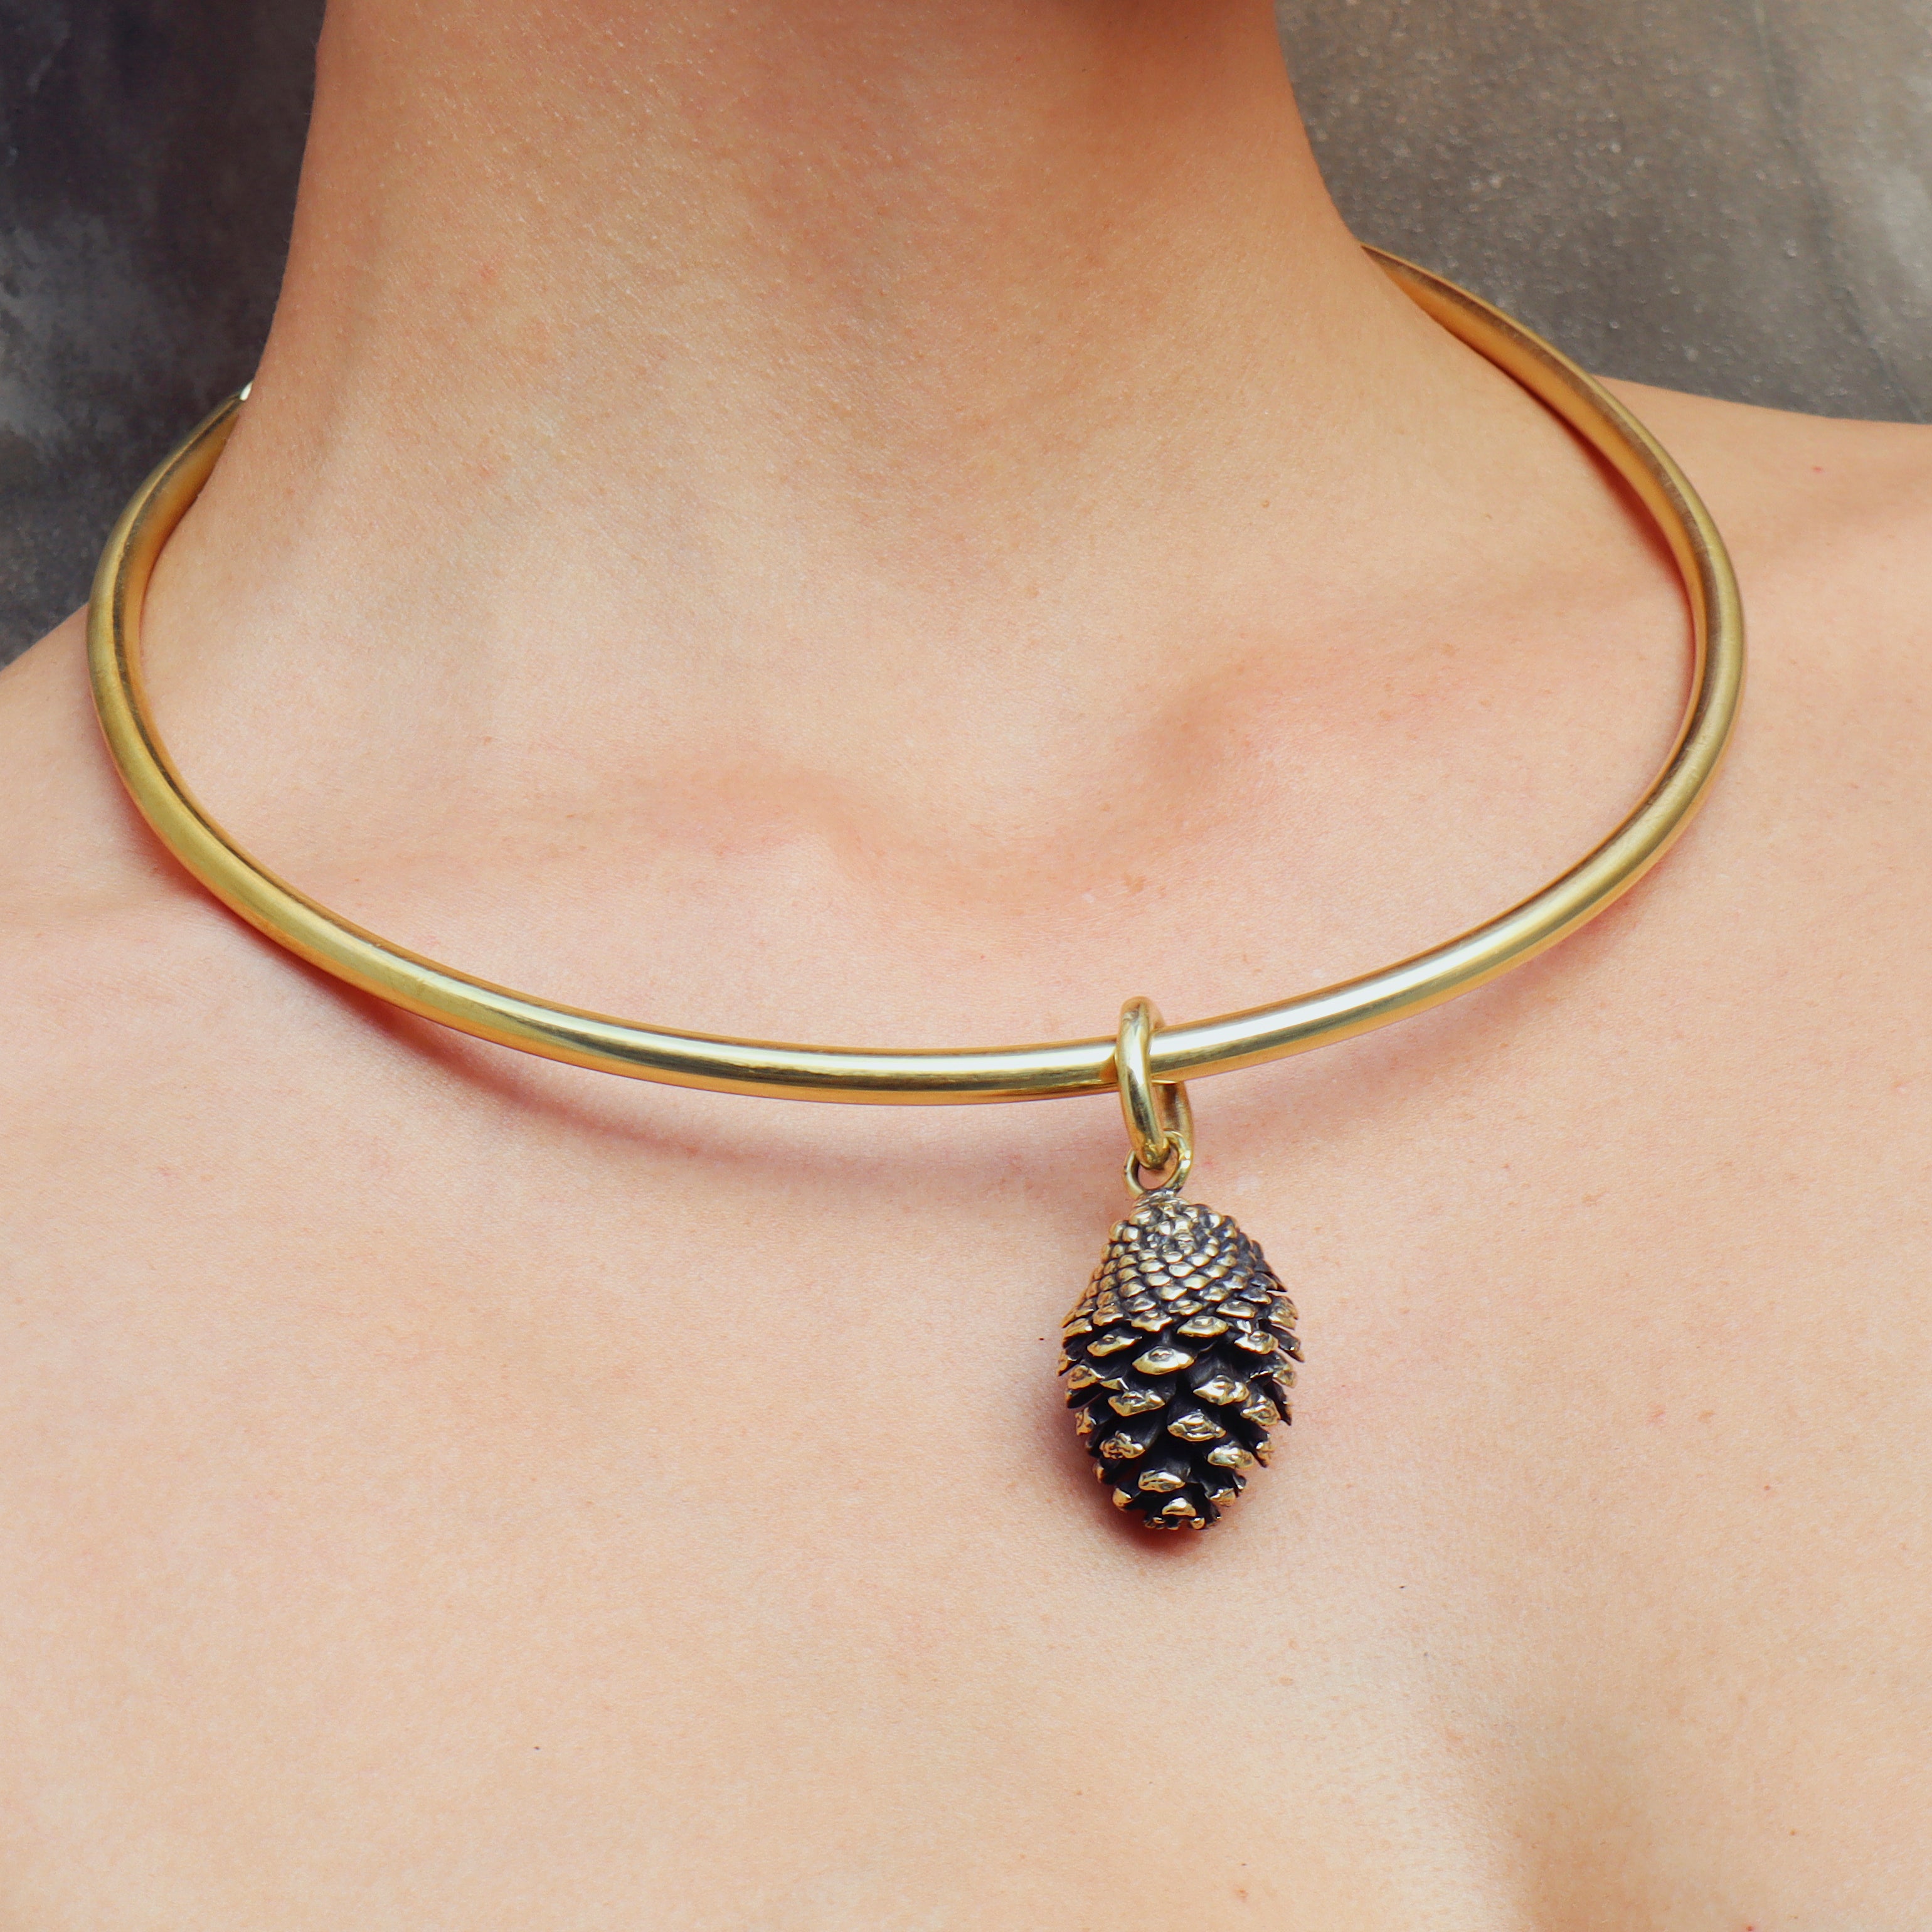 Buy Gifts for Her, Pine Cone Necklace, Minimalist, Rose Gold Necklace,  Dainty Gold Necklace, Minimalist, Handmade Jewelry, Bridesmaid Gifts Online  in India - Etsy